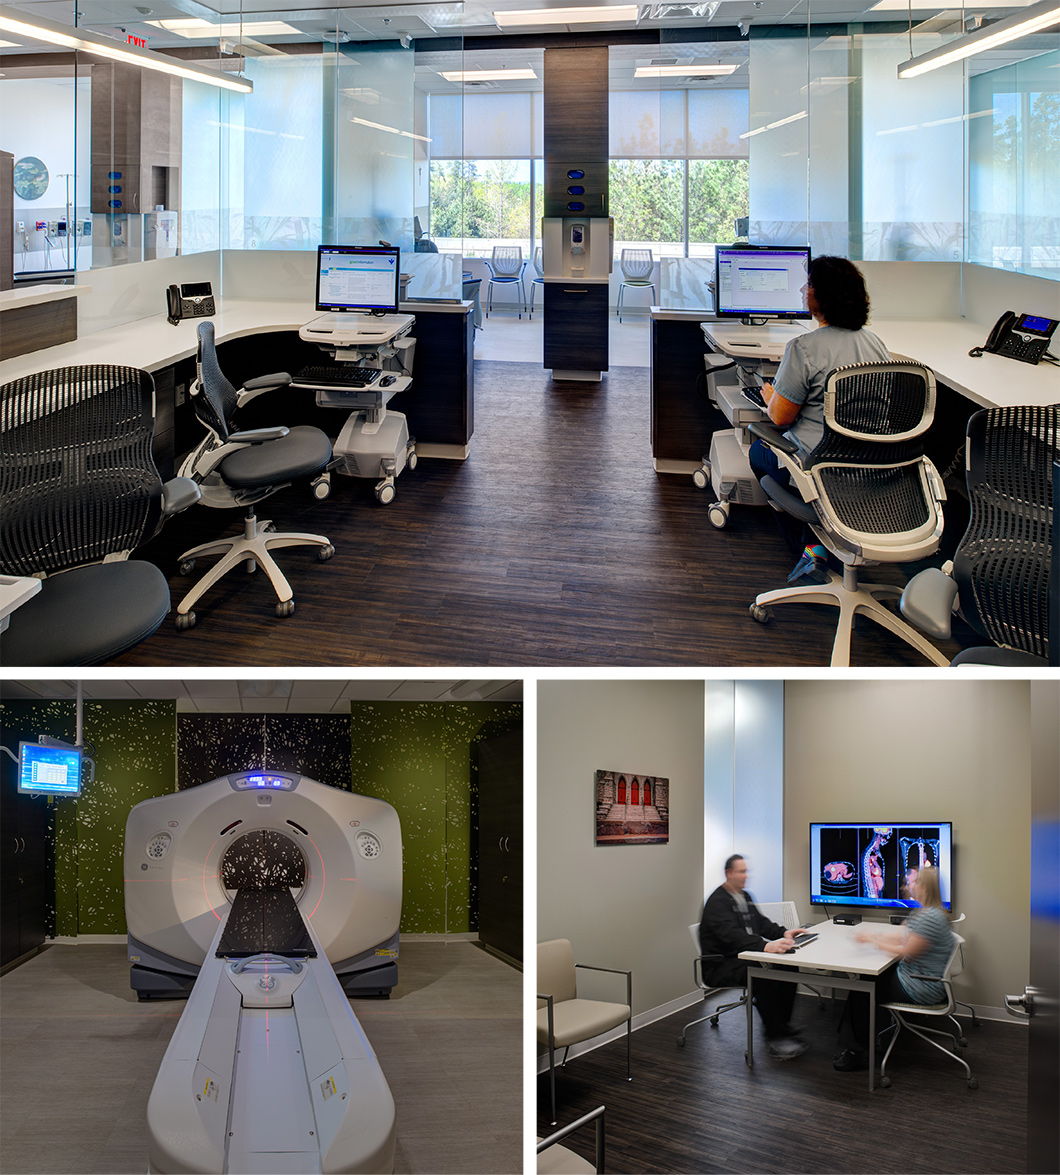 Top: Caregiver work areas near infusion treatment bays sit behind transparent barriers, making it easy for patients to feel connected to staff while also enjoying some privacy. Featured: Generation by Knoll<sup>®</sup> Work Chairs, MultiGeneration by Knoll<sup>®</sup> Stacking Chairs<br><br>Bottom Left: Laser-cut FilzFelt transforms a CT simulation room into a soothing, forest-like space.<br><br>Bottom Right: Consultations areas, located near treatment areas, make it easy for patients to meet with physicians, administrators or other support staff without having to traveling to a different area of the building. Featured: MultiGeneration by Knoll<sup>®</sup> Stacking Chairs, Antenna<sup>®</sup> Workspaces